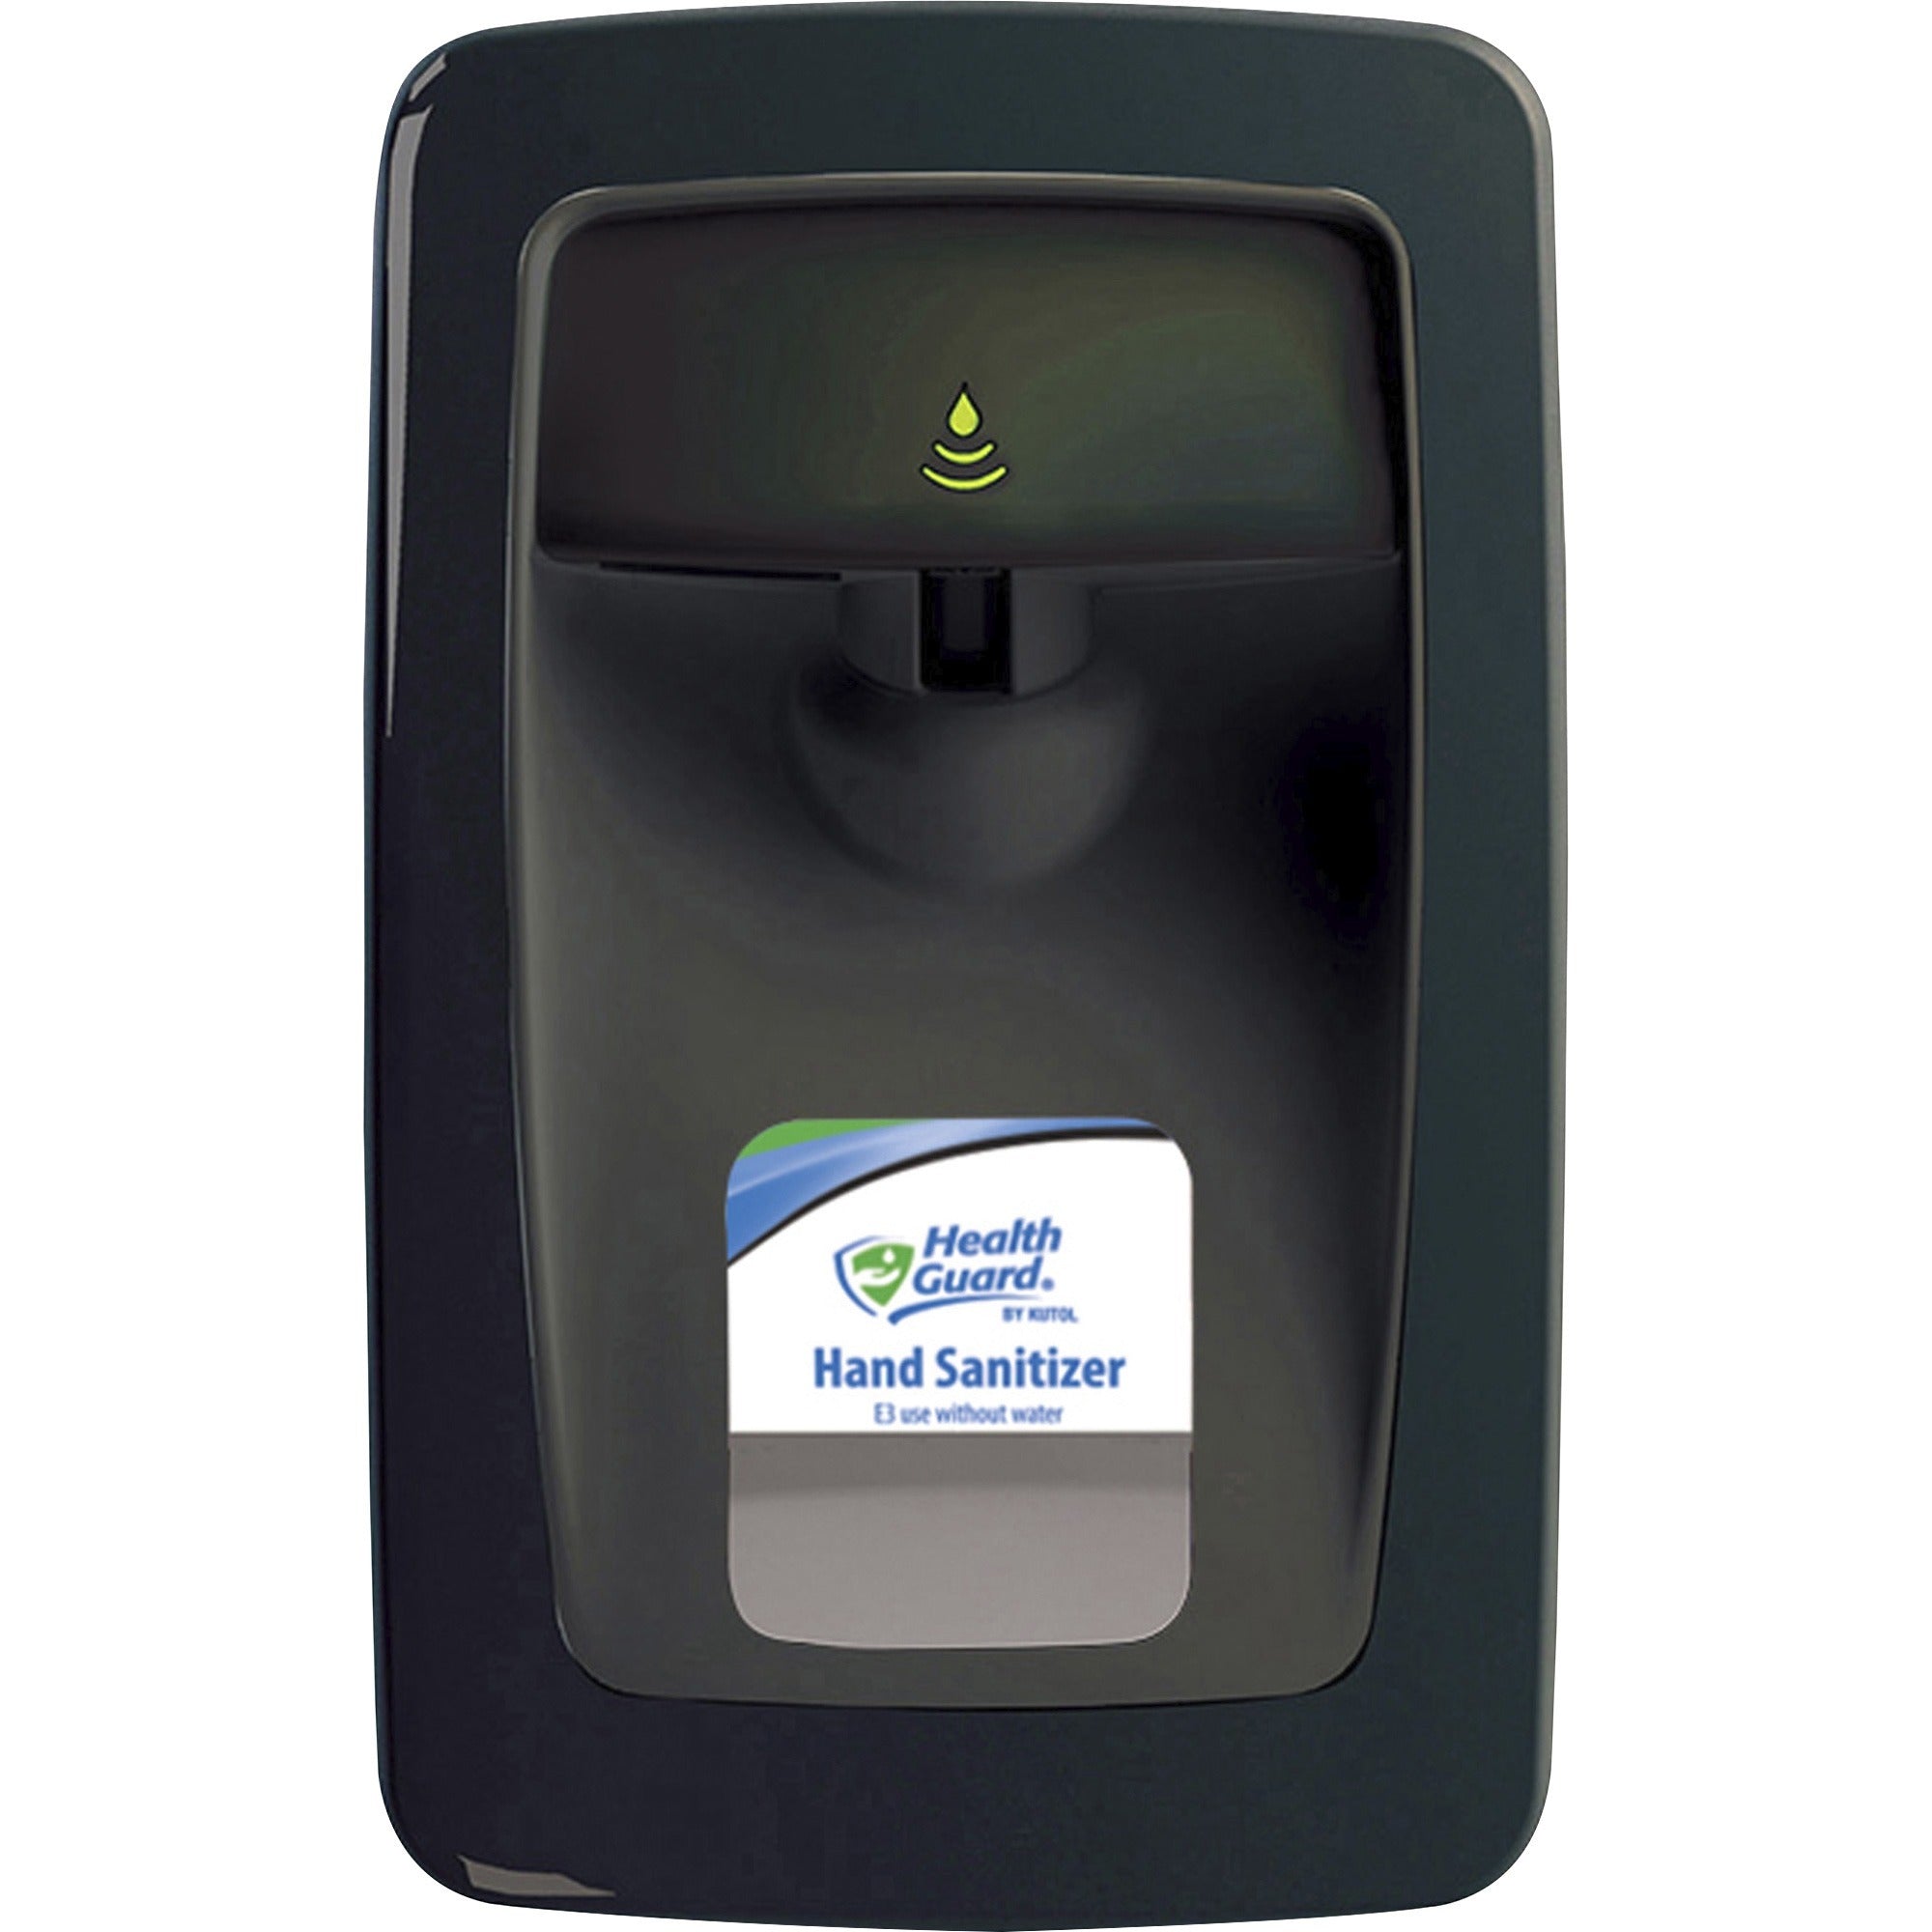 health-guard-designer-series-no-touch-dispenser-automatic-106-quart-capacity-support-4-x-c-battery-touch-free-key-lock-refillable-black-1each_kutns011bk31 - 1